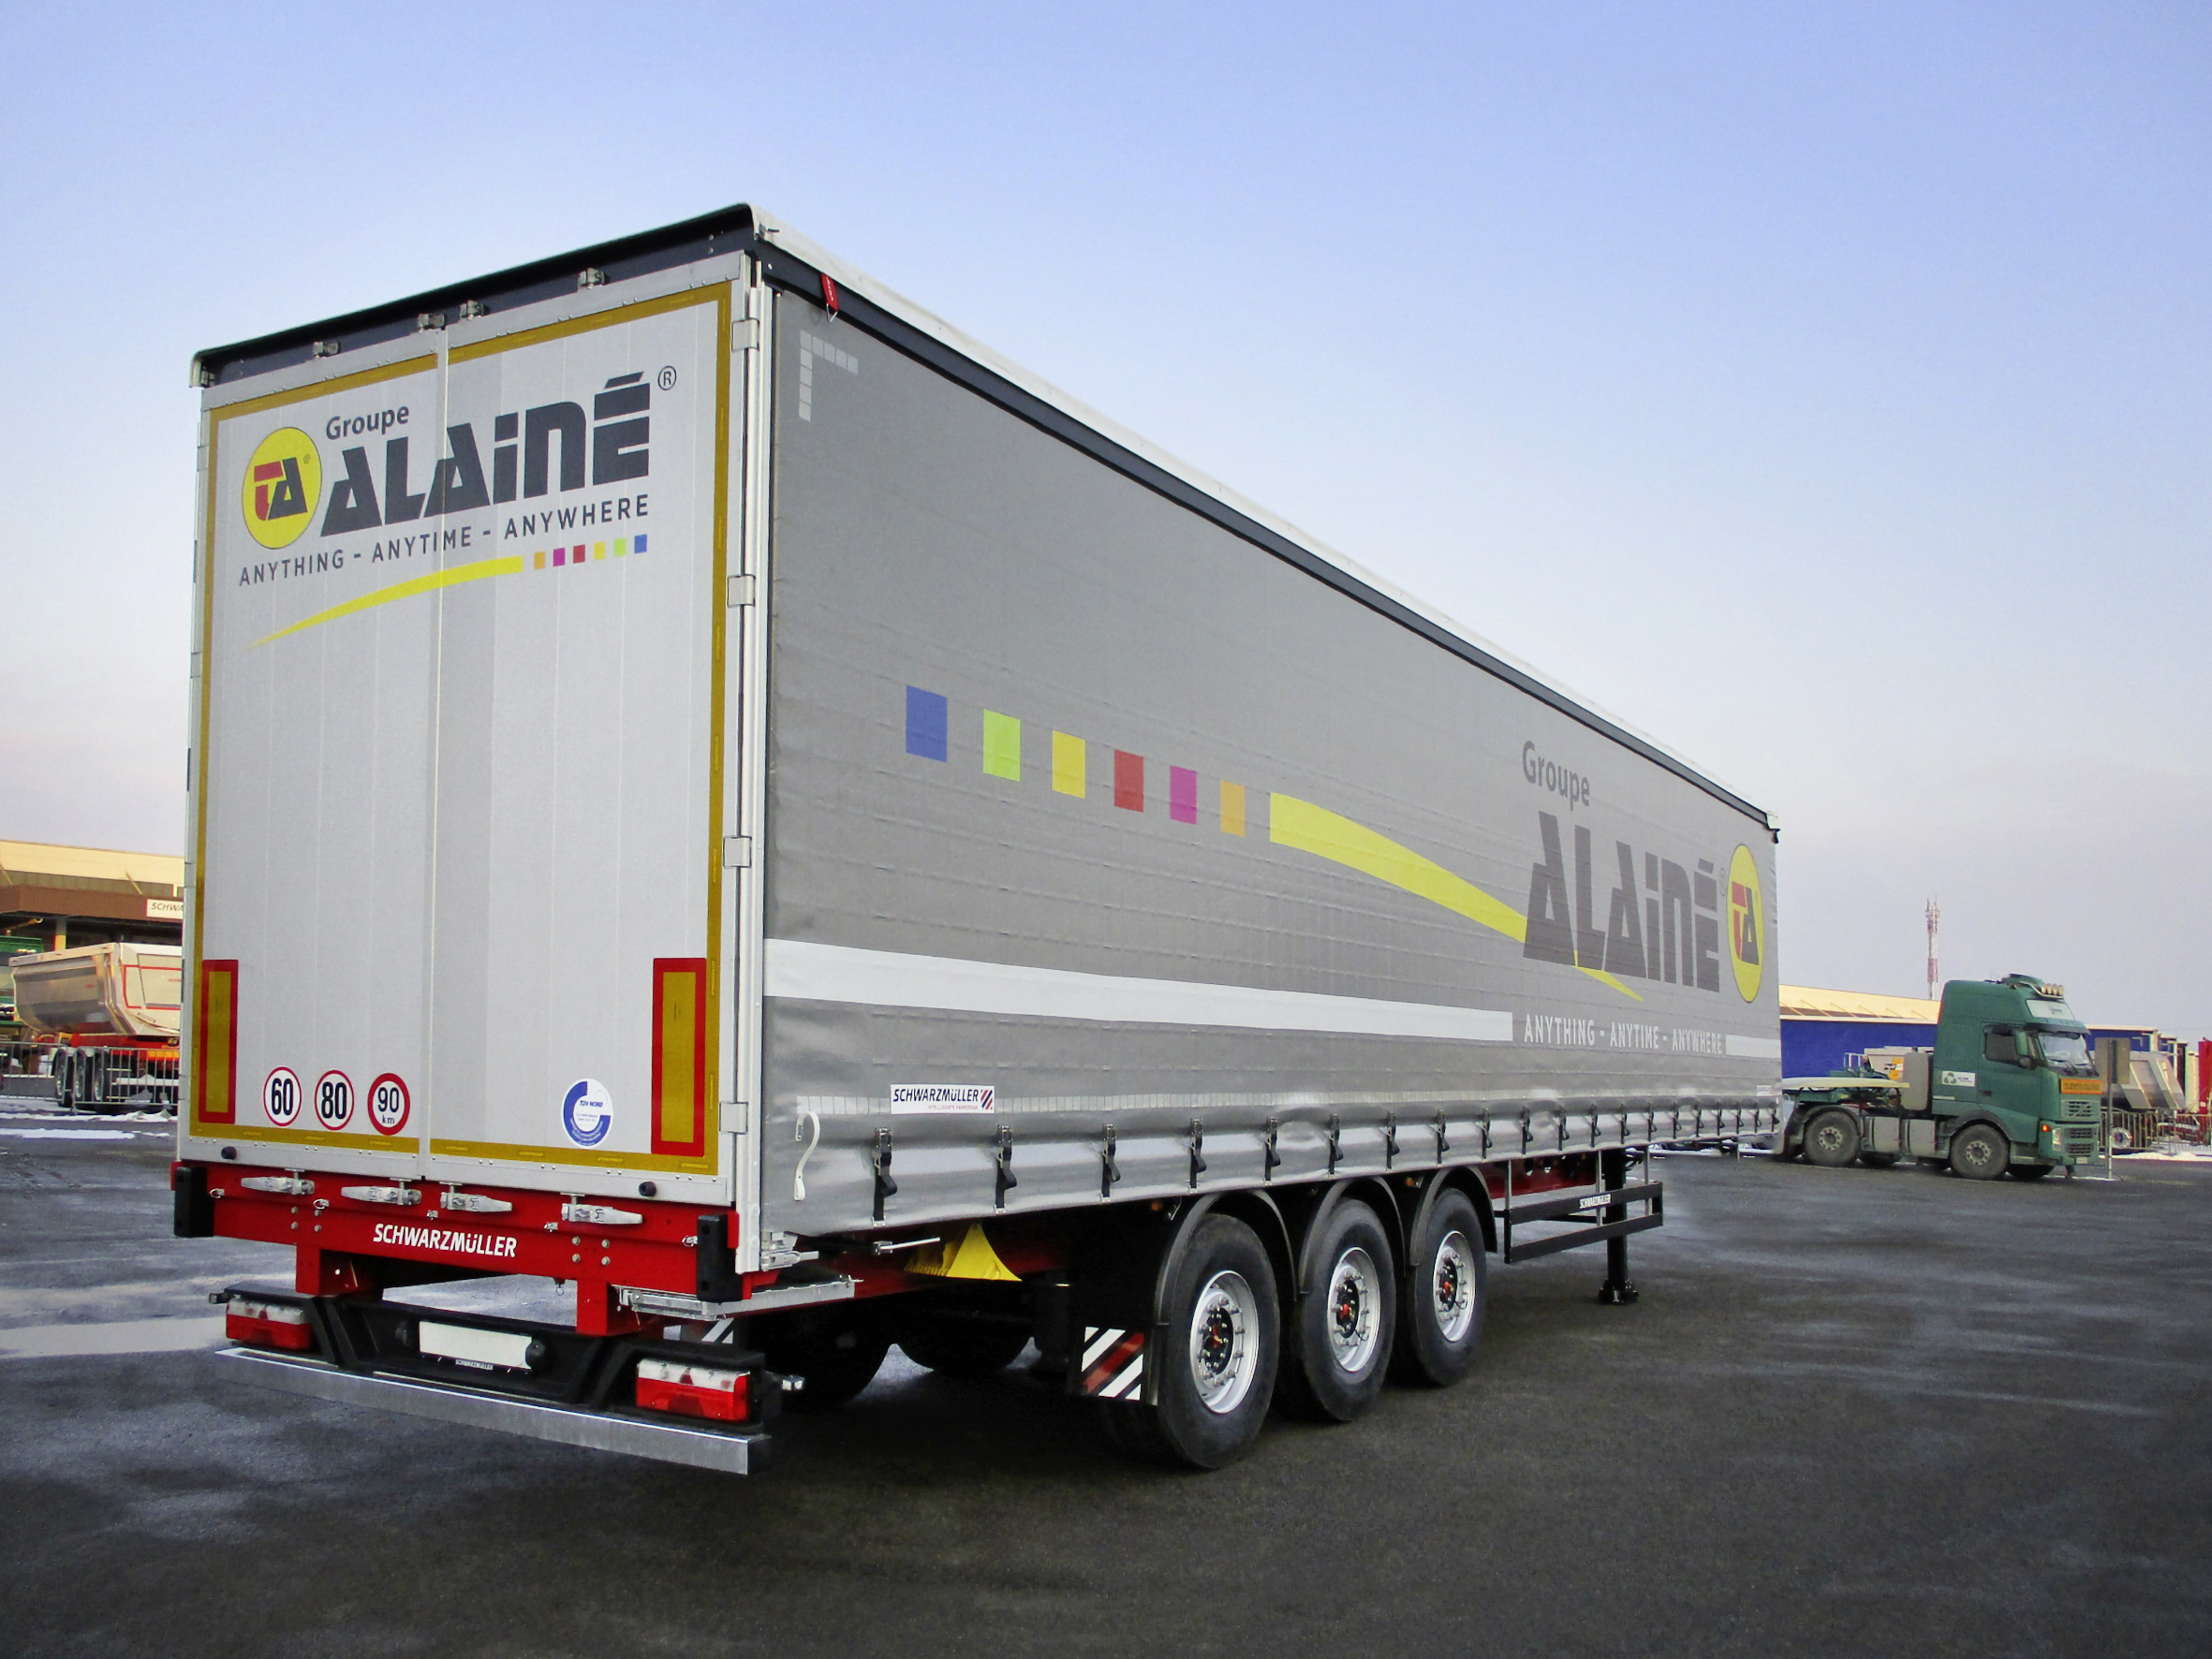 Groupe Alaine orders 40 ultralight coil trailers from Schwarzmüller